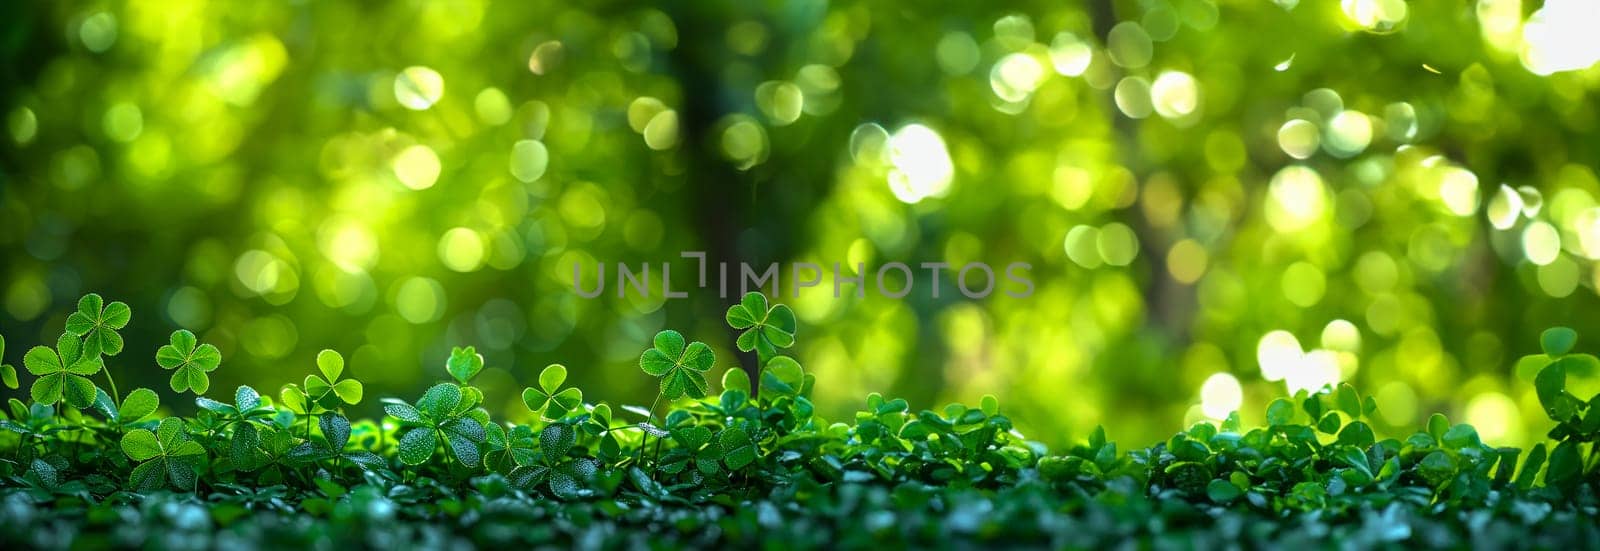 Green St. Patrick day seamless background with clover four-leaf blured leaves. Fresh clover leaves on green background. Copy space. St. Patrick's Day celebration background space for text by Annebel146